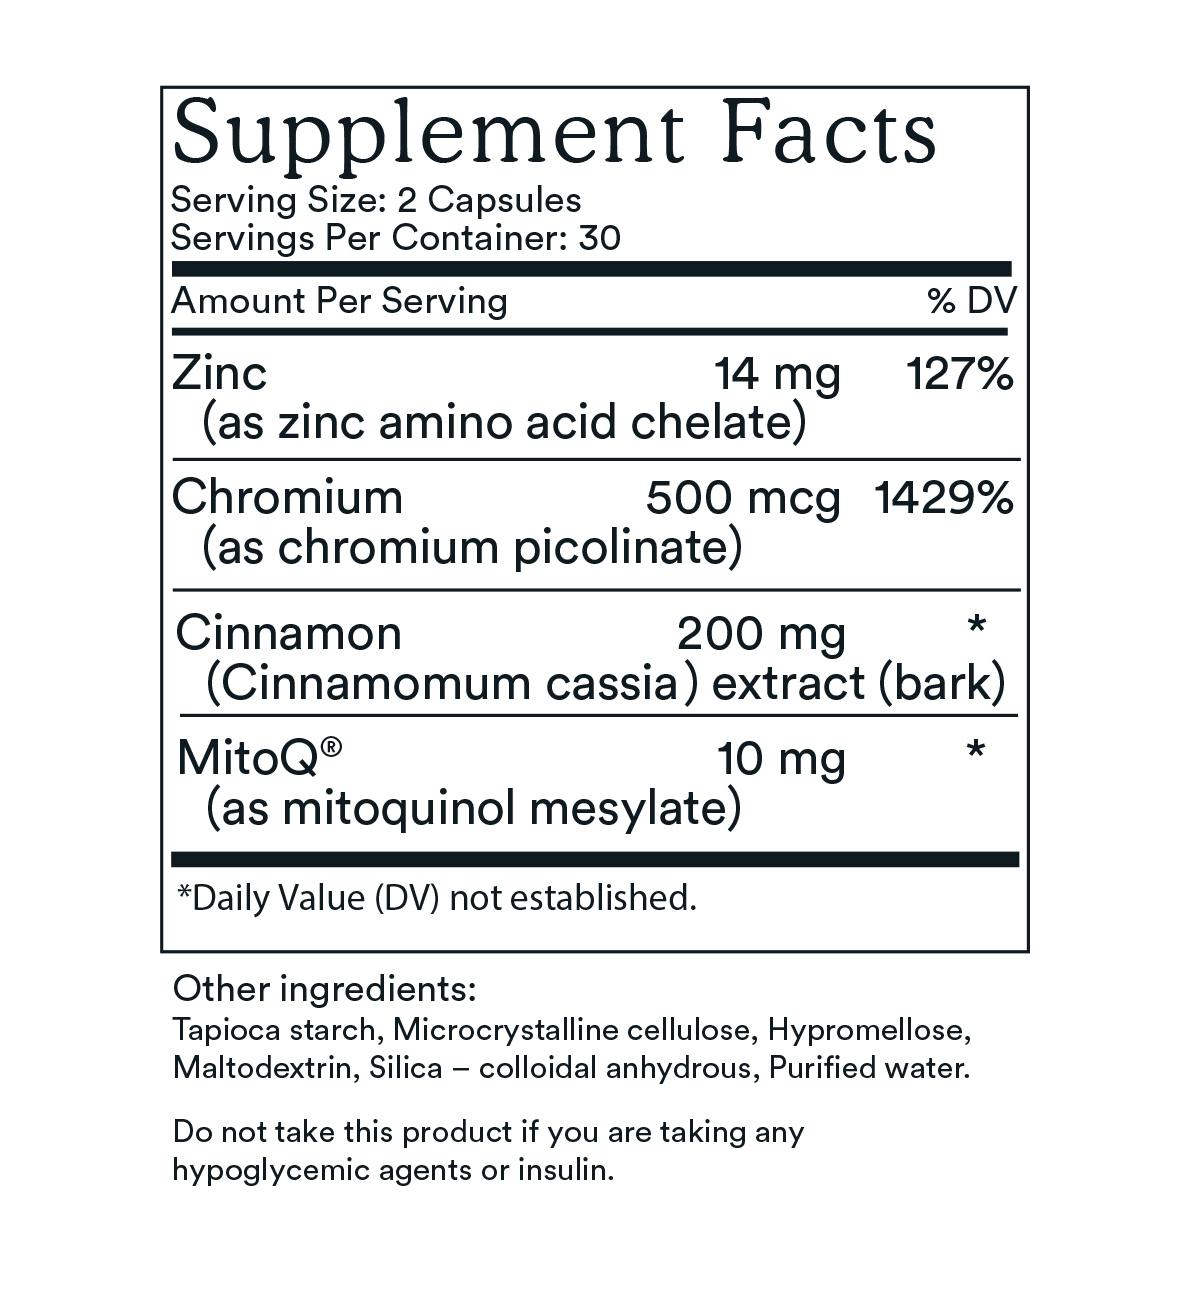 Supplement Facts label for MitoQ +blood sugar